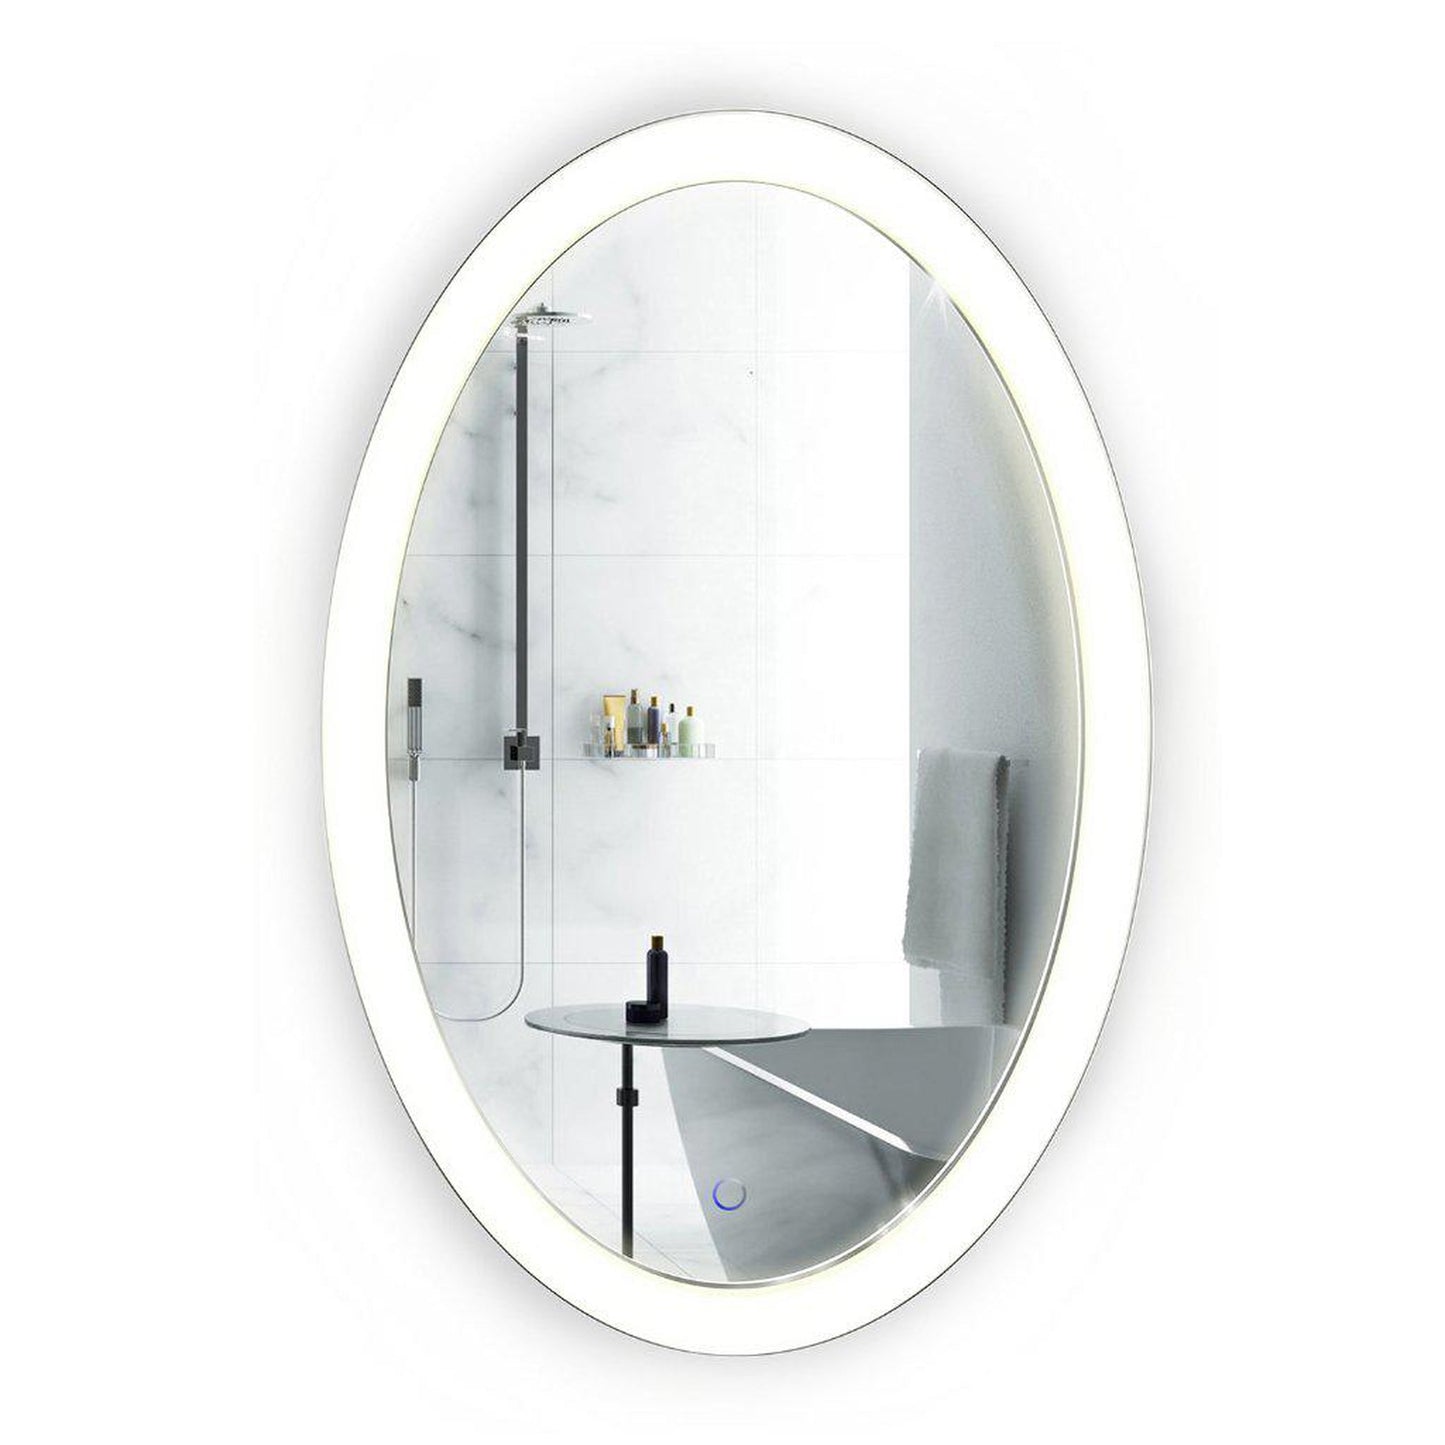 Krugg Reflections Sol 20" x 30" 5000K Oval Wall-Mounted Illuminated Silver Backed LED Mirror With Built-in Defogger and Touch Sensor On/Off Built-in Dimmer